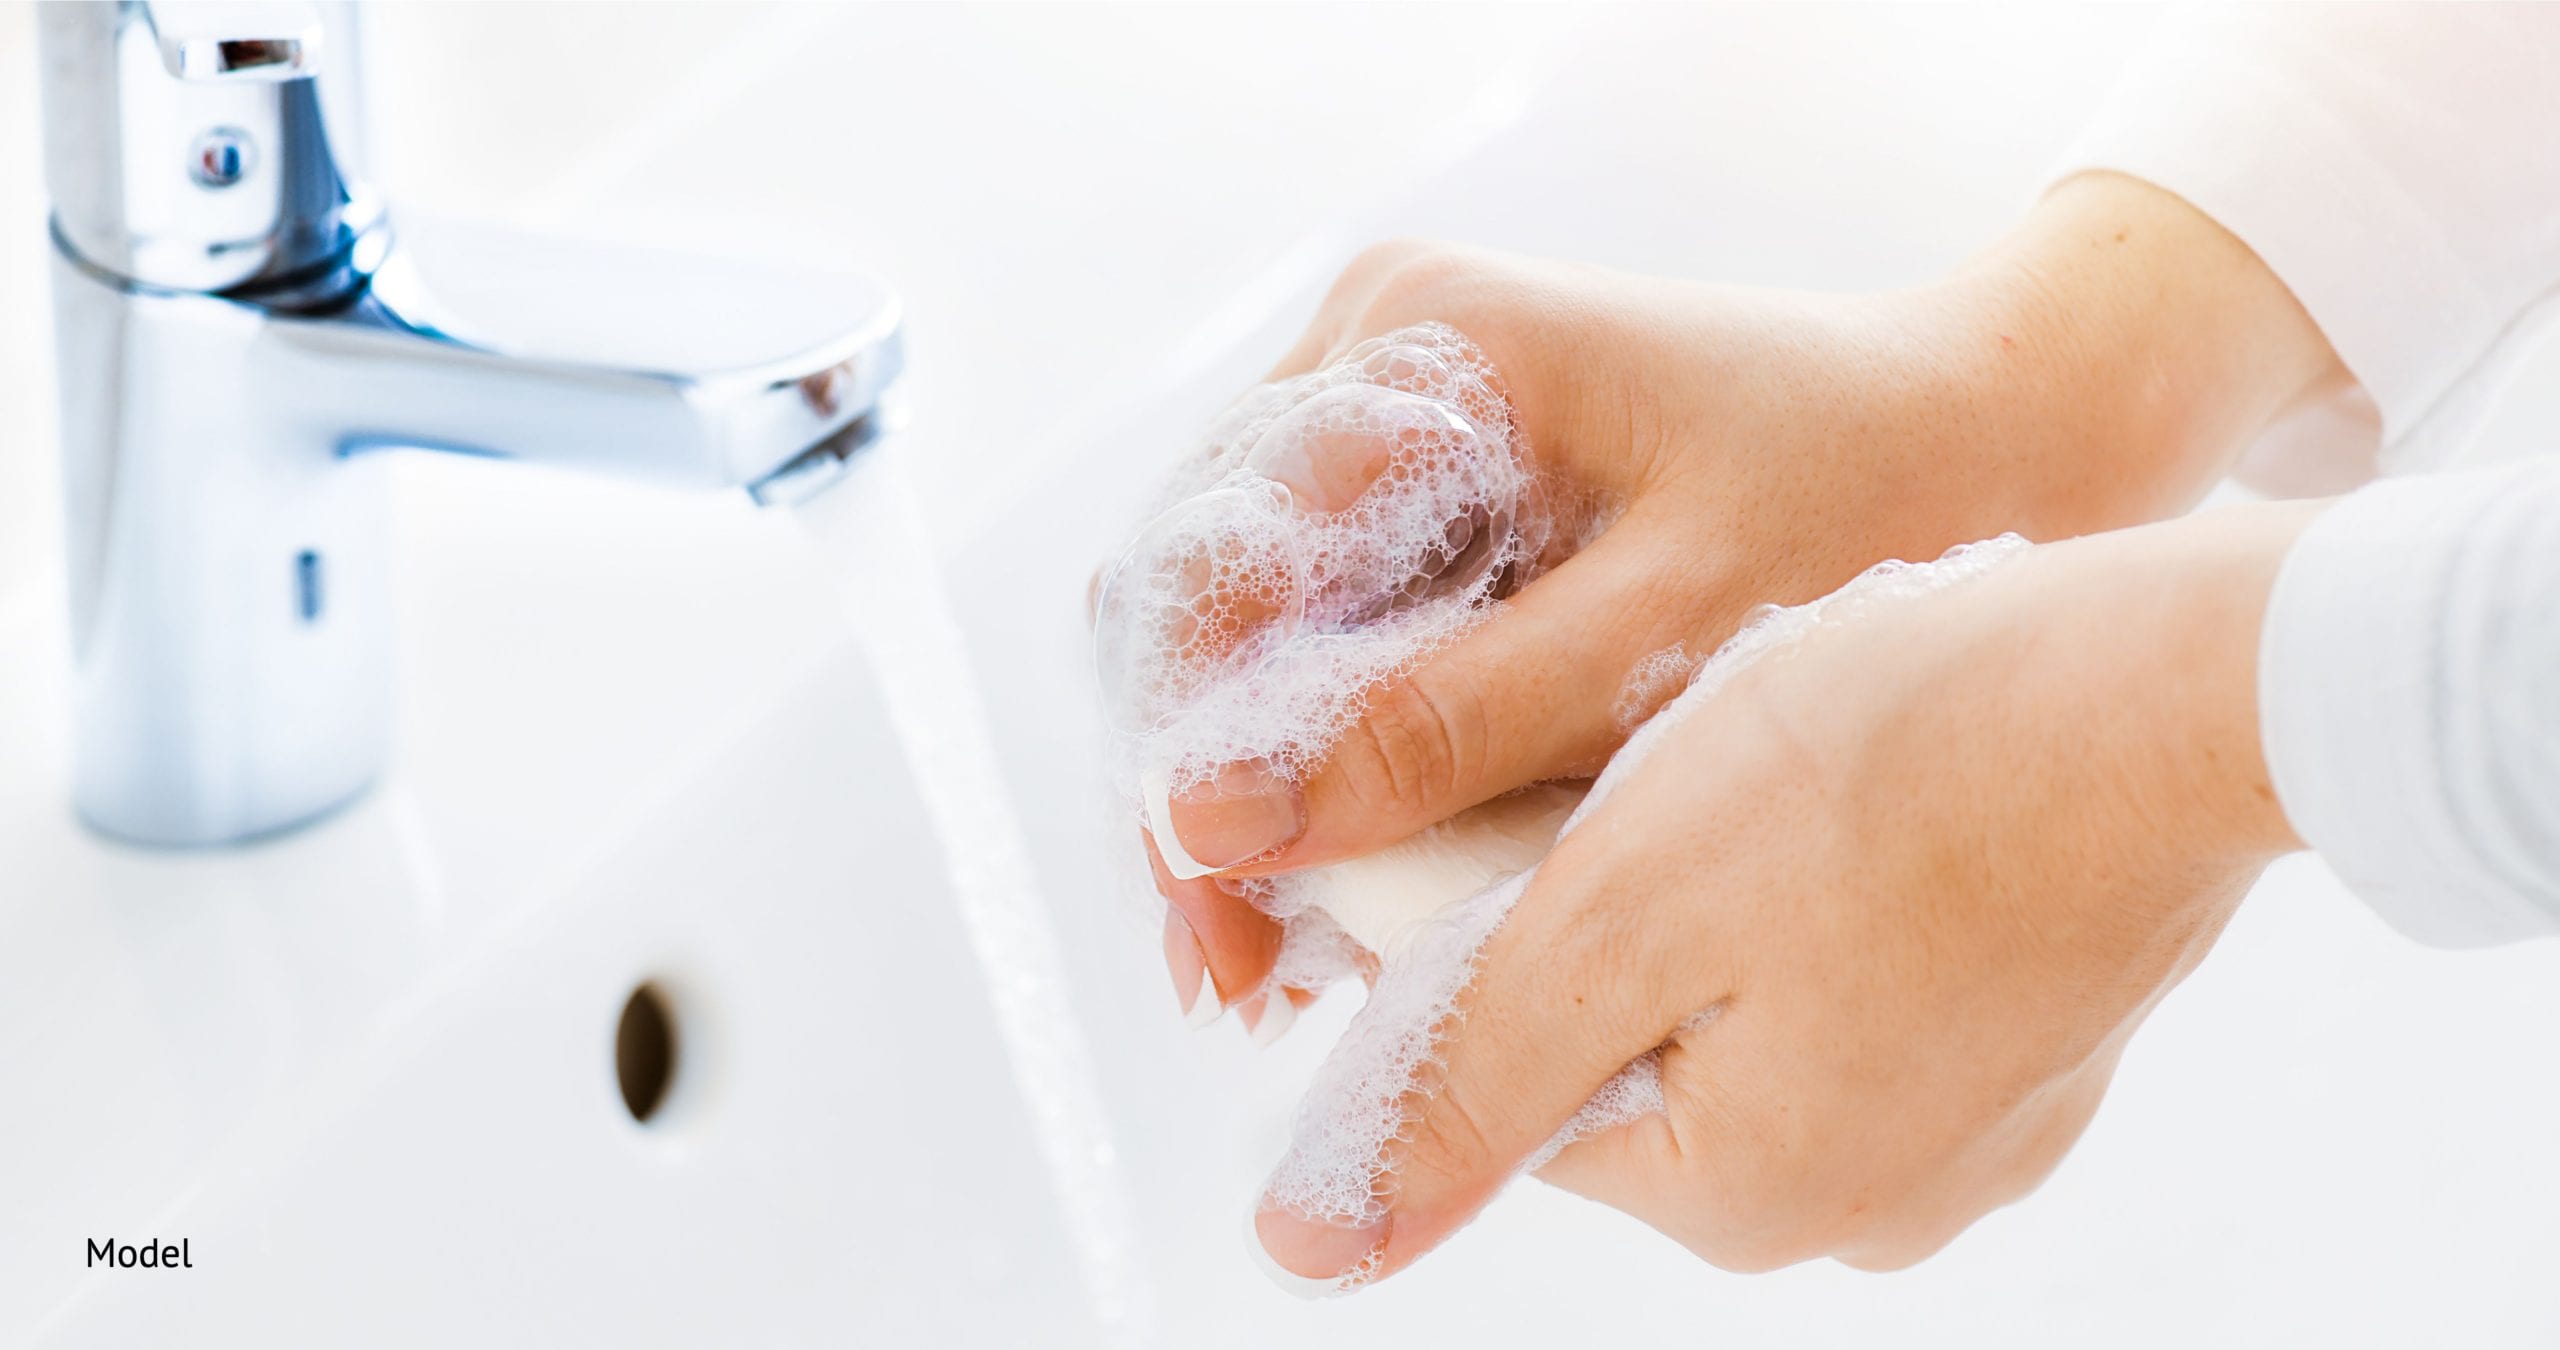 Washing your hands can help to prevent the spread of COVID-19